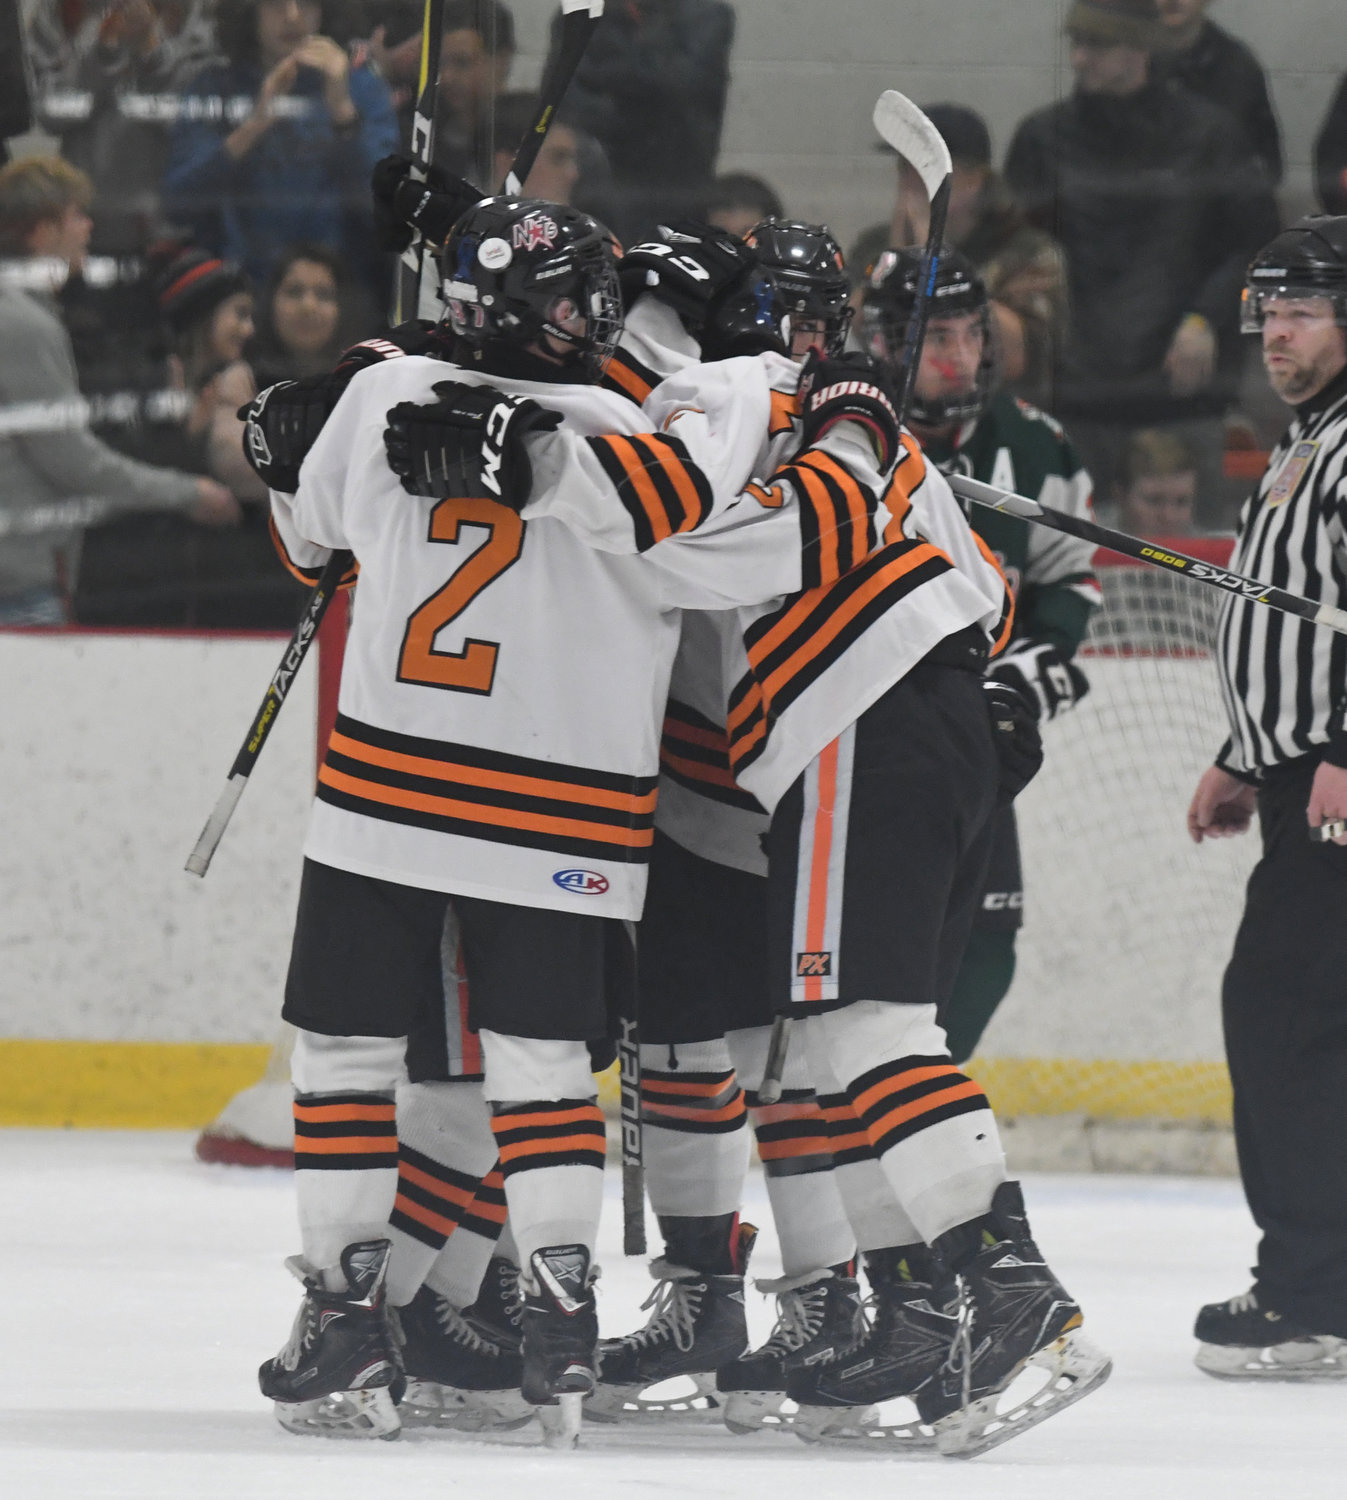 FIRST BLOOD — Rome Free Academy players celebrate the team’s first goal Friday night at Kennedy Arena against Fulton. Captain Danny Mecca scored on the power play to get the scoring started en route to a 4-1 win.